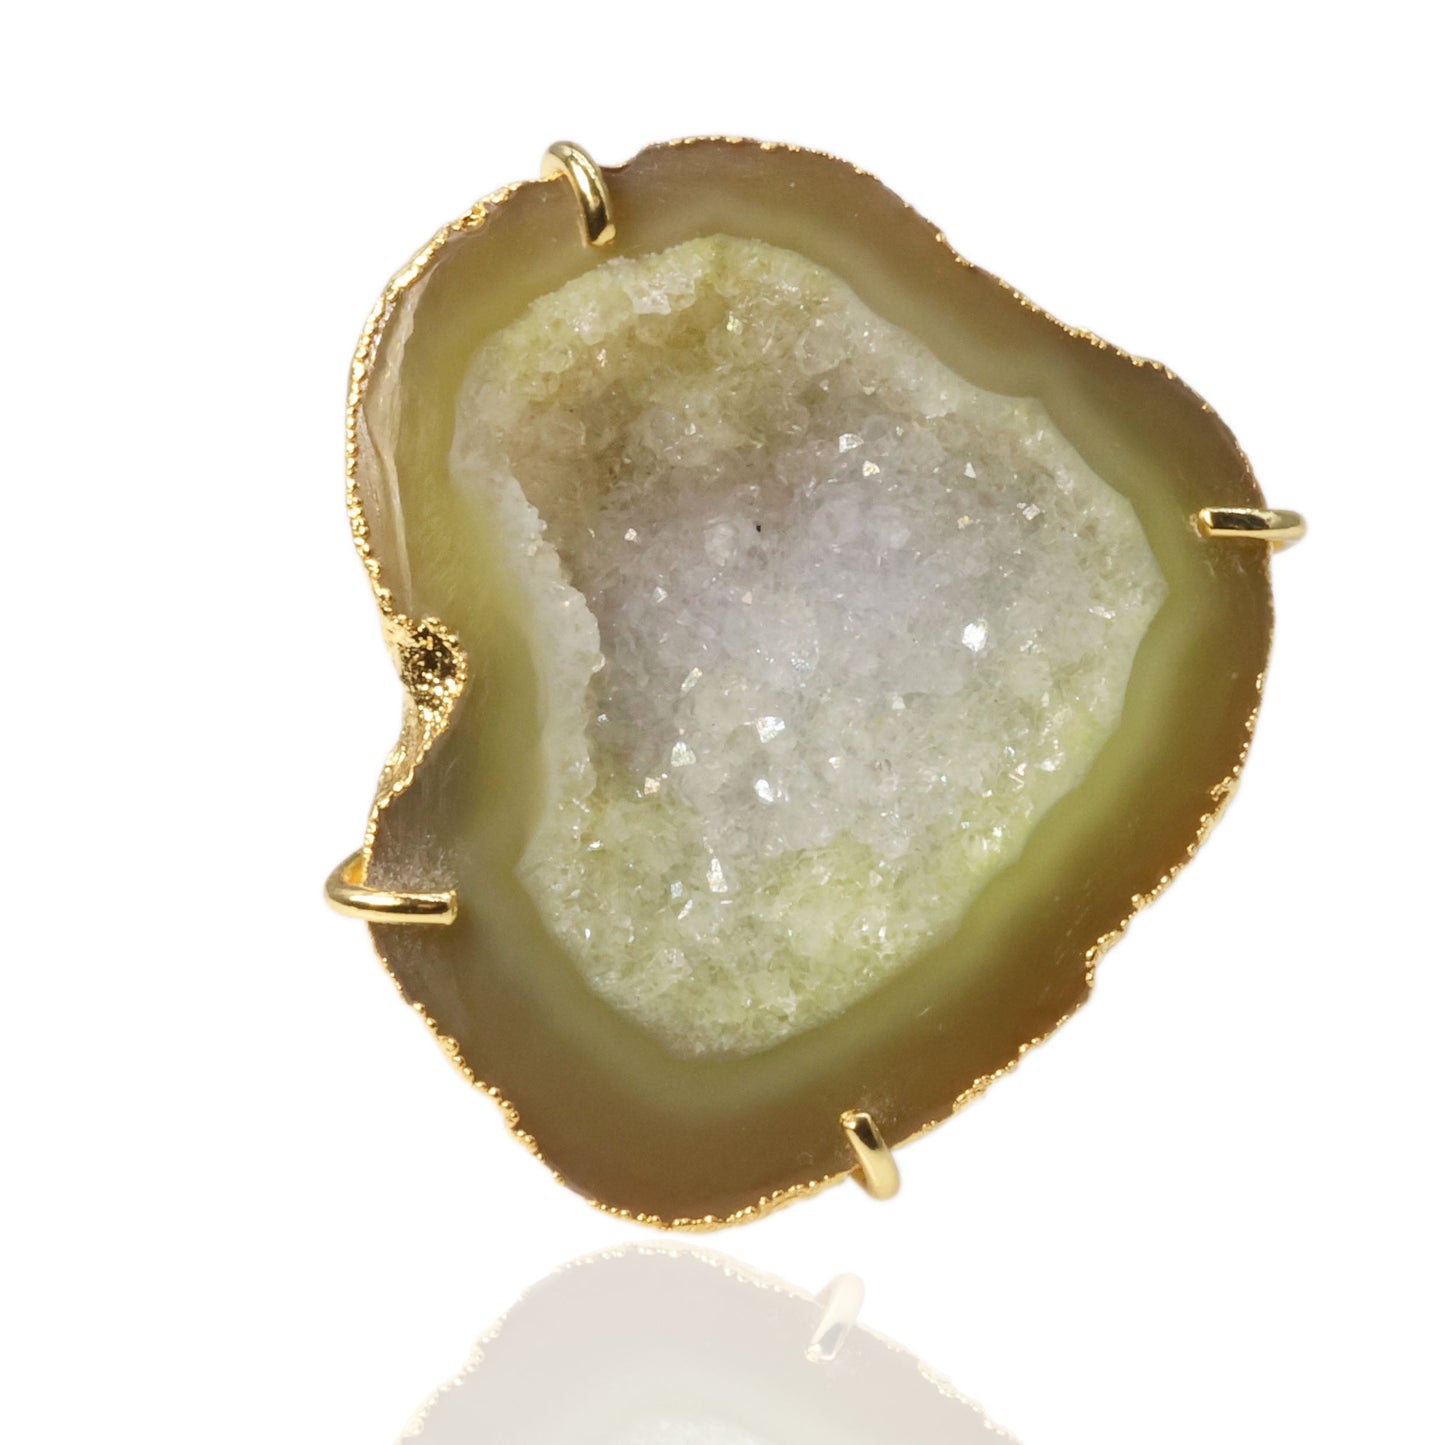 Anokha Large Geode Statement Rings, 30 - 40 MM, Unlimited Sparkle in Life !! - Meena Design